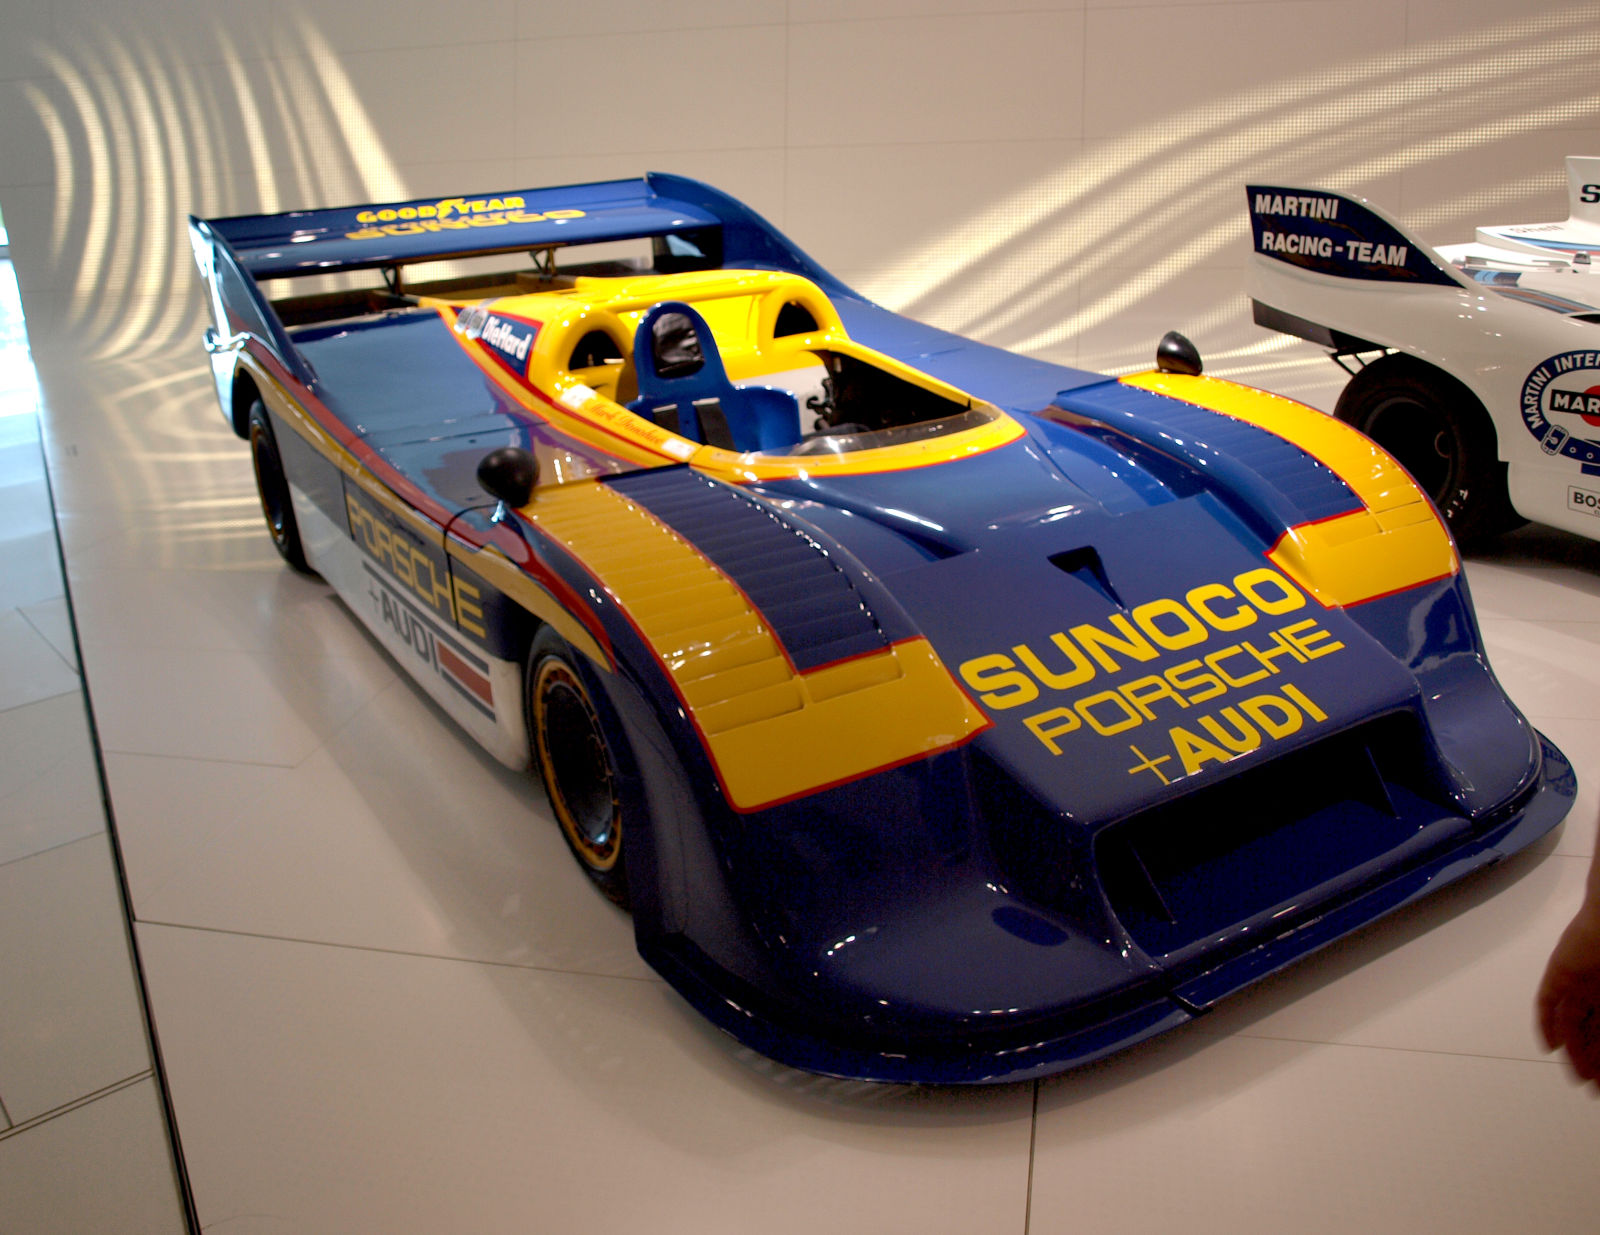 The beast.  Most powerful race car ever made? Probably.